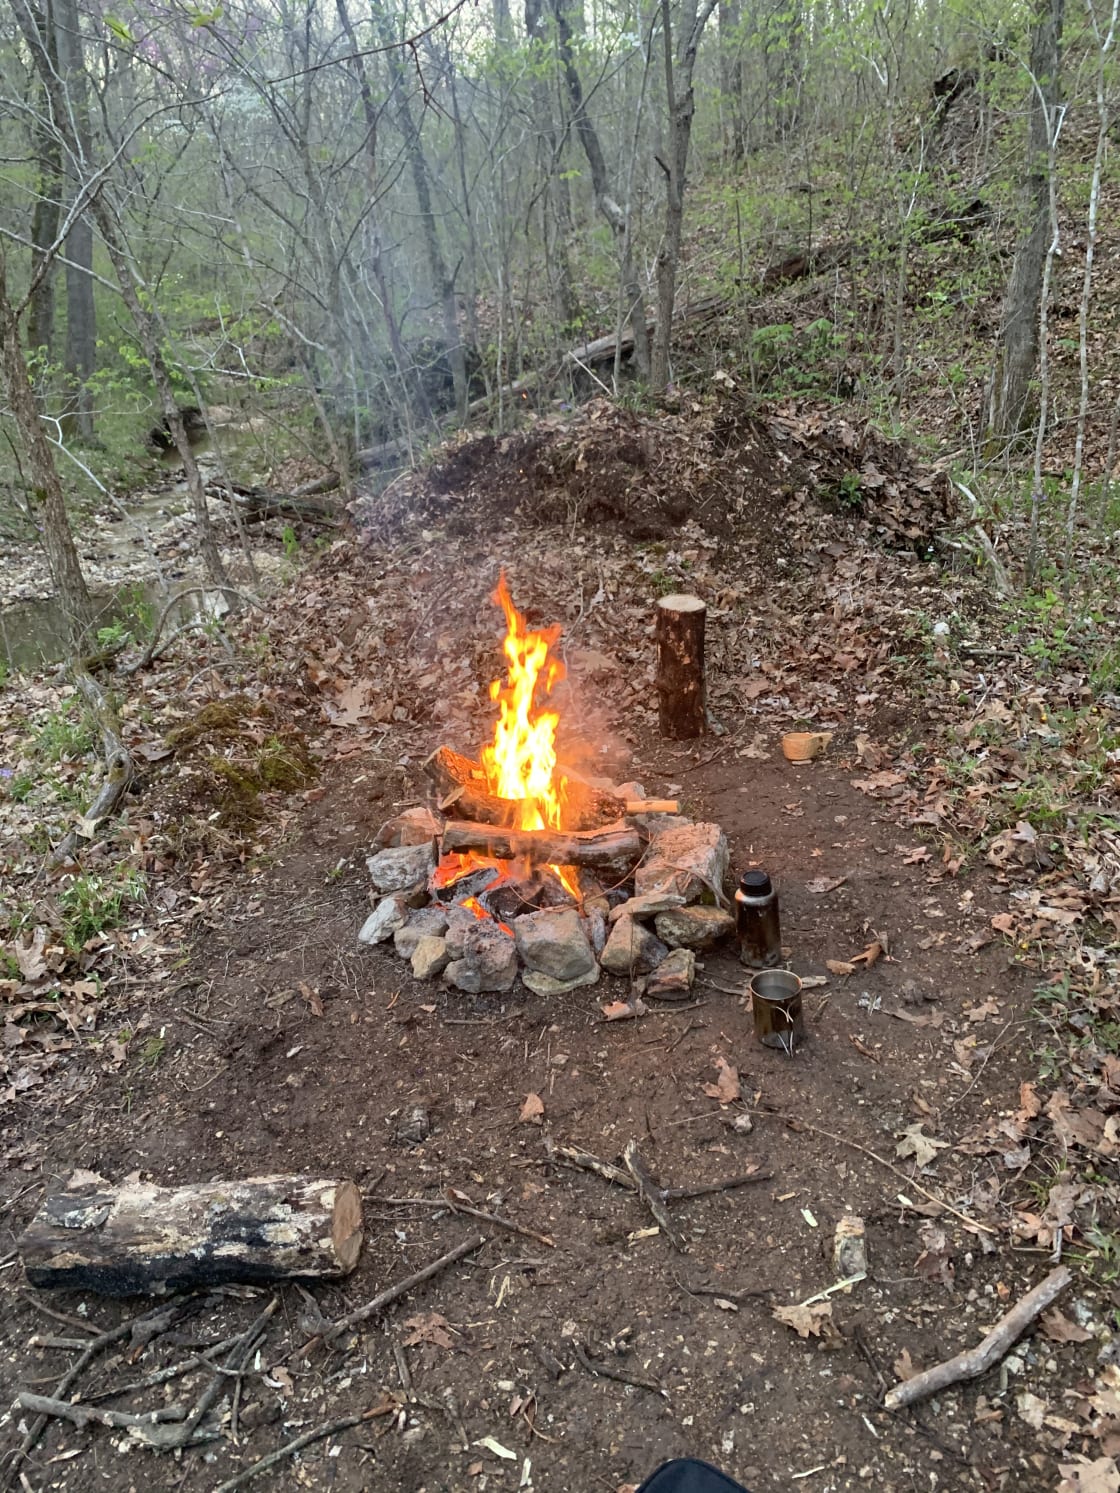 Perfect fire by the spring fed stream